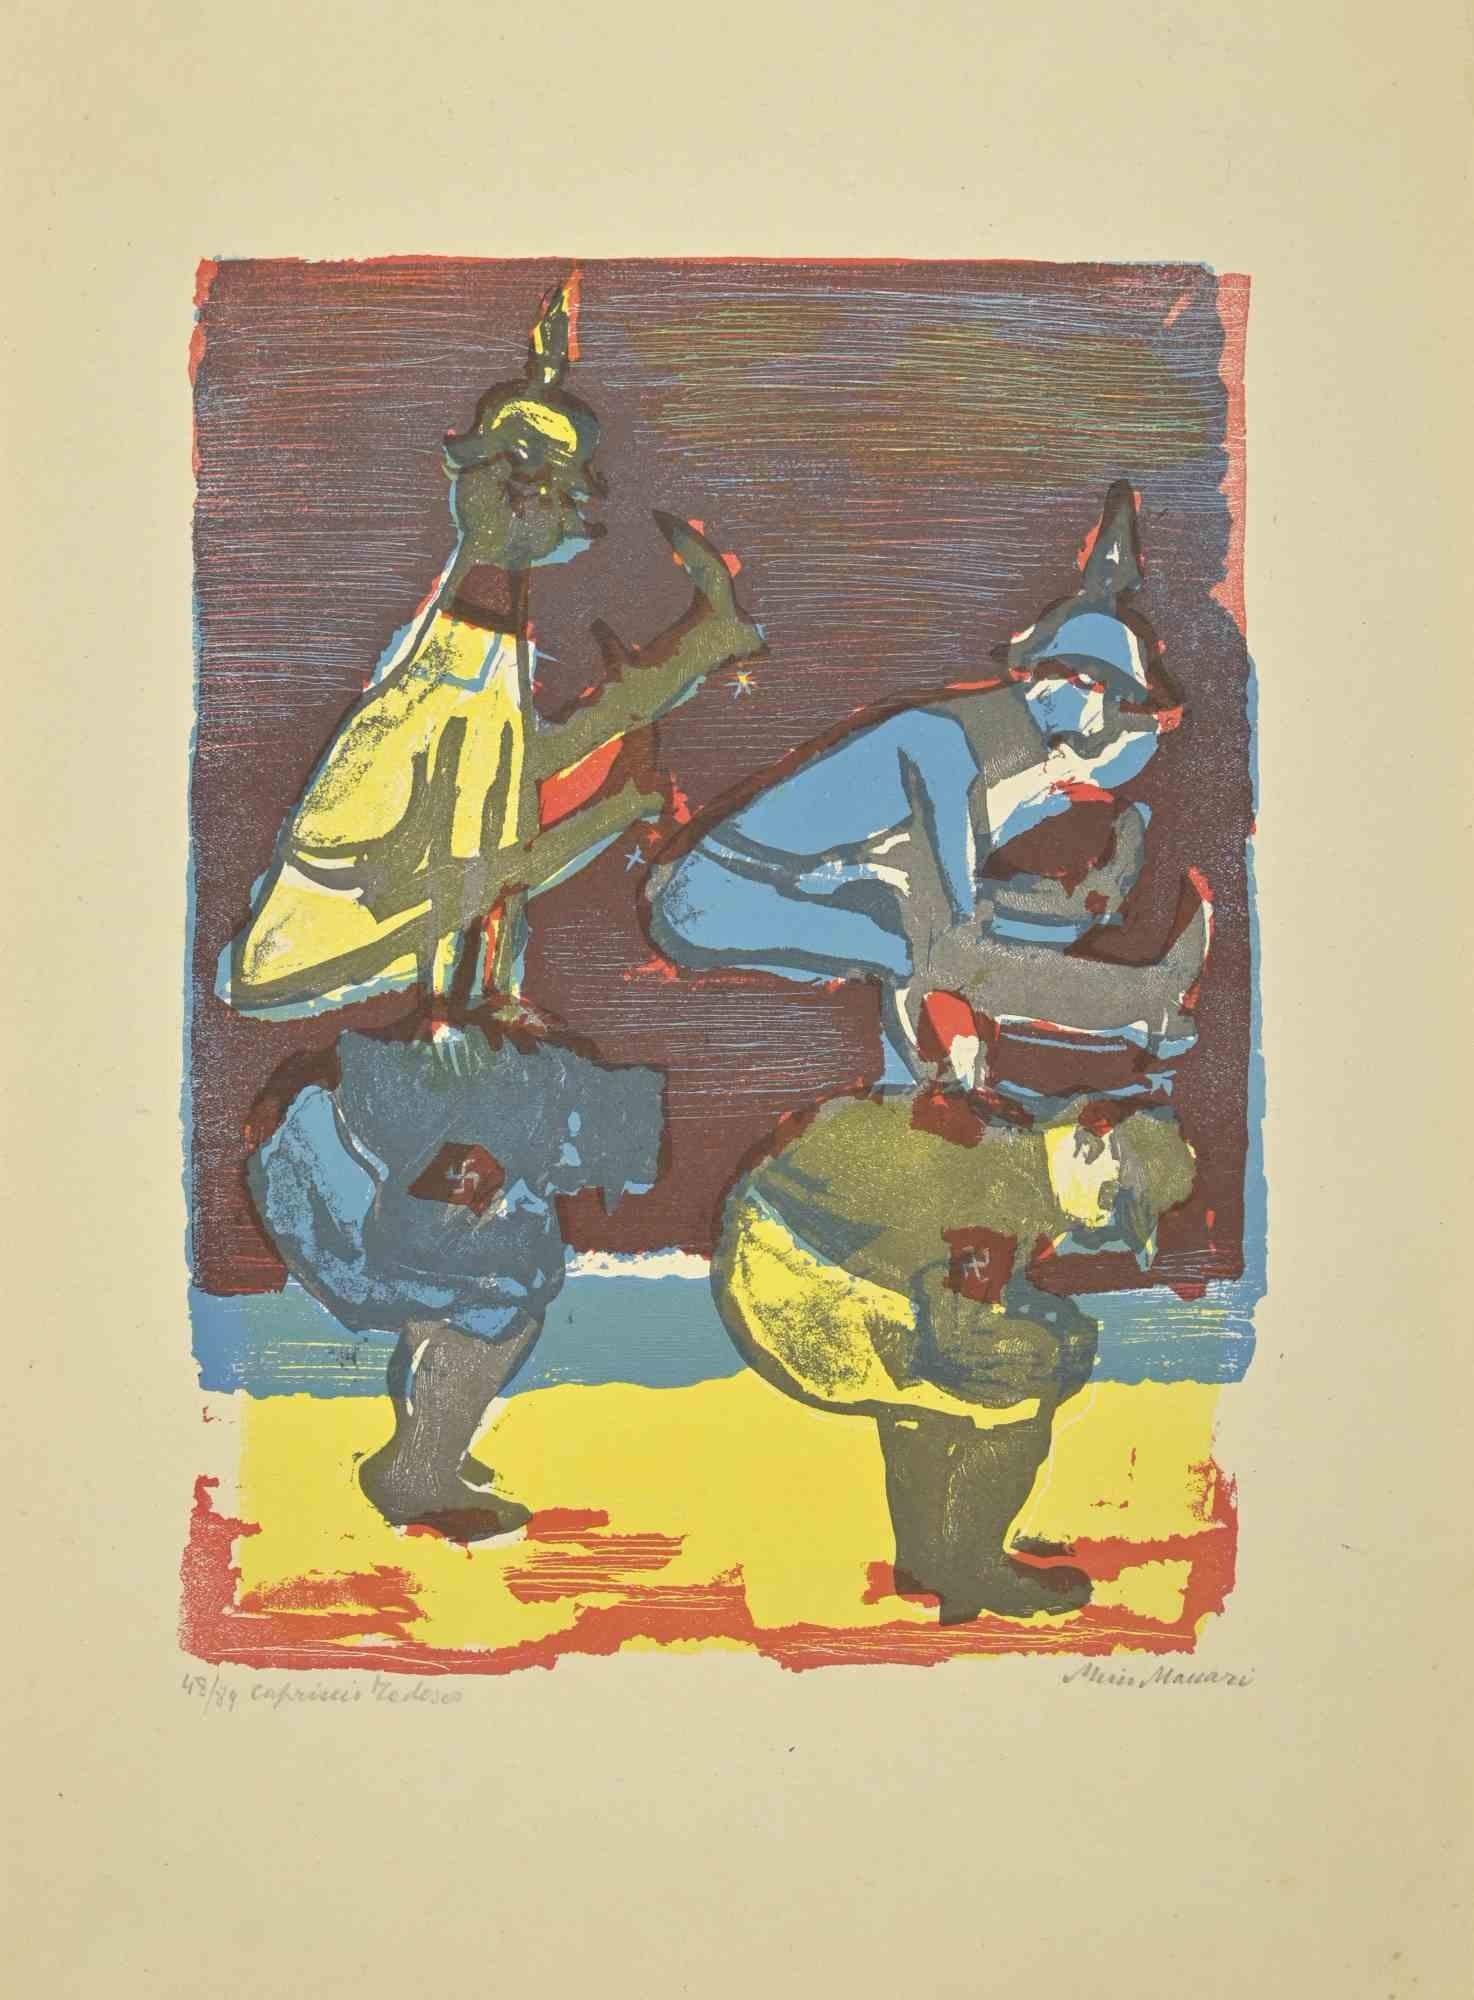 The Game is a Linocut realized by Mino Maccari in the Mid-20th Century.

Hand-signed in the lower right part.

Numbered. Edition,48/89.

Good conditions.

 

Mino Maccari (Siena, 1924-Rome, June 16, 1989) was an Italian writer, painter, engraver and